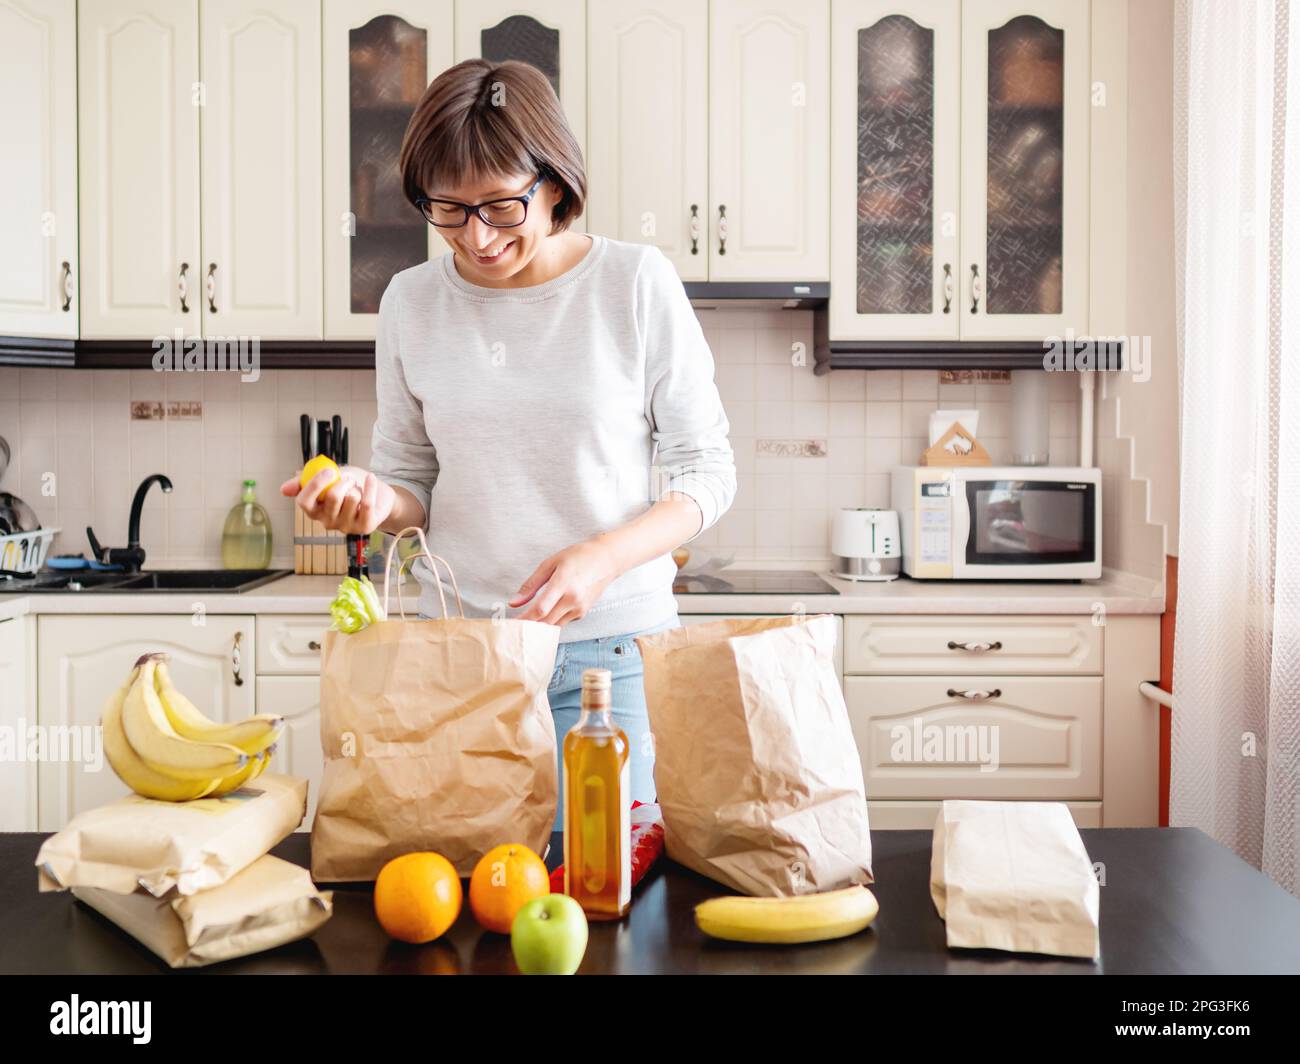 Woman sorts out purchases in the kitchen. Grocery delivery in paper bags. Subscription service from grocery store. Stock Photo